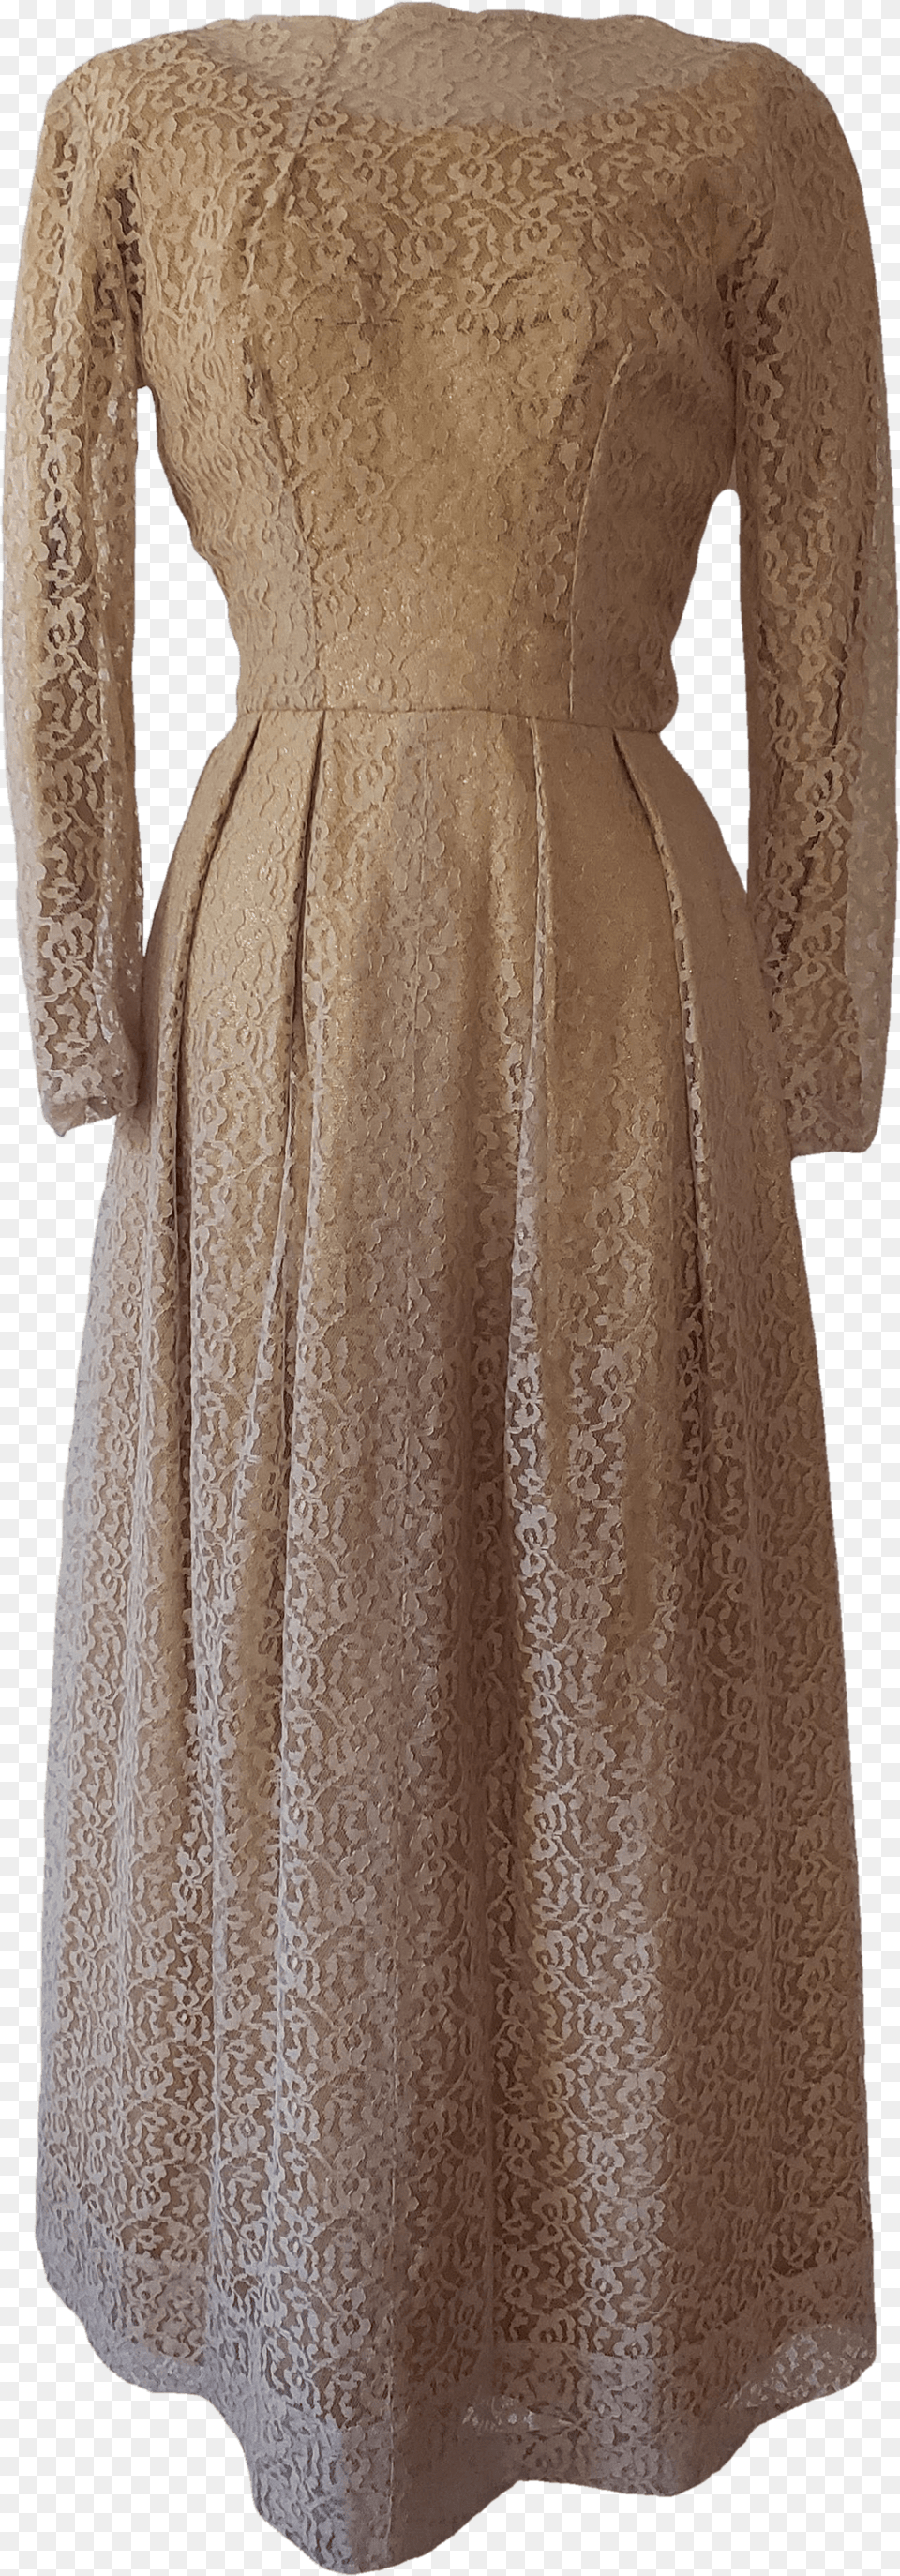 Shiny Gold Dress With Tan Lace Overlay Full Length, Formal Wear, Gown, Sleeve, Wedding Free Png